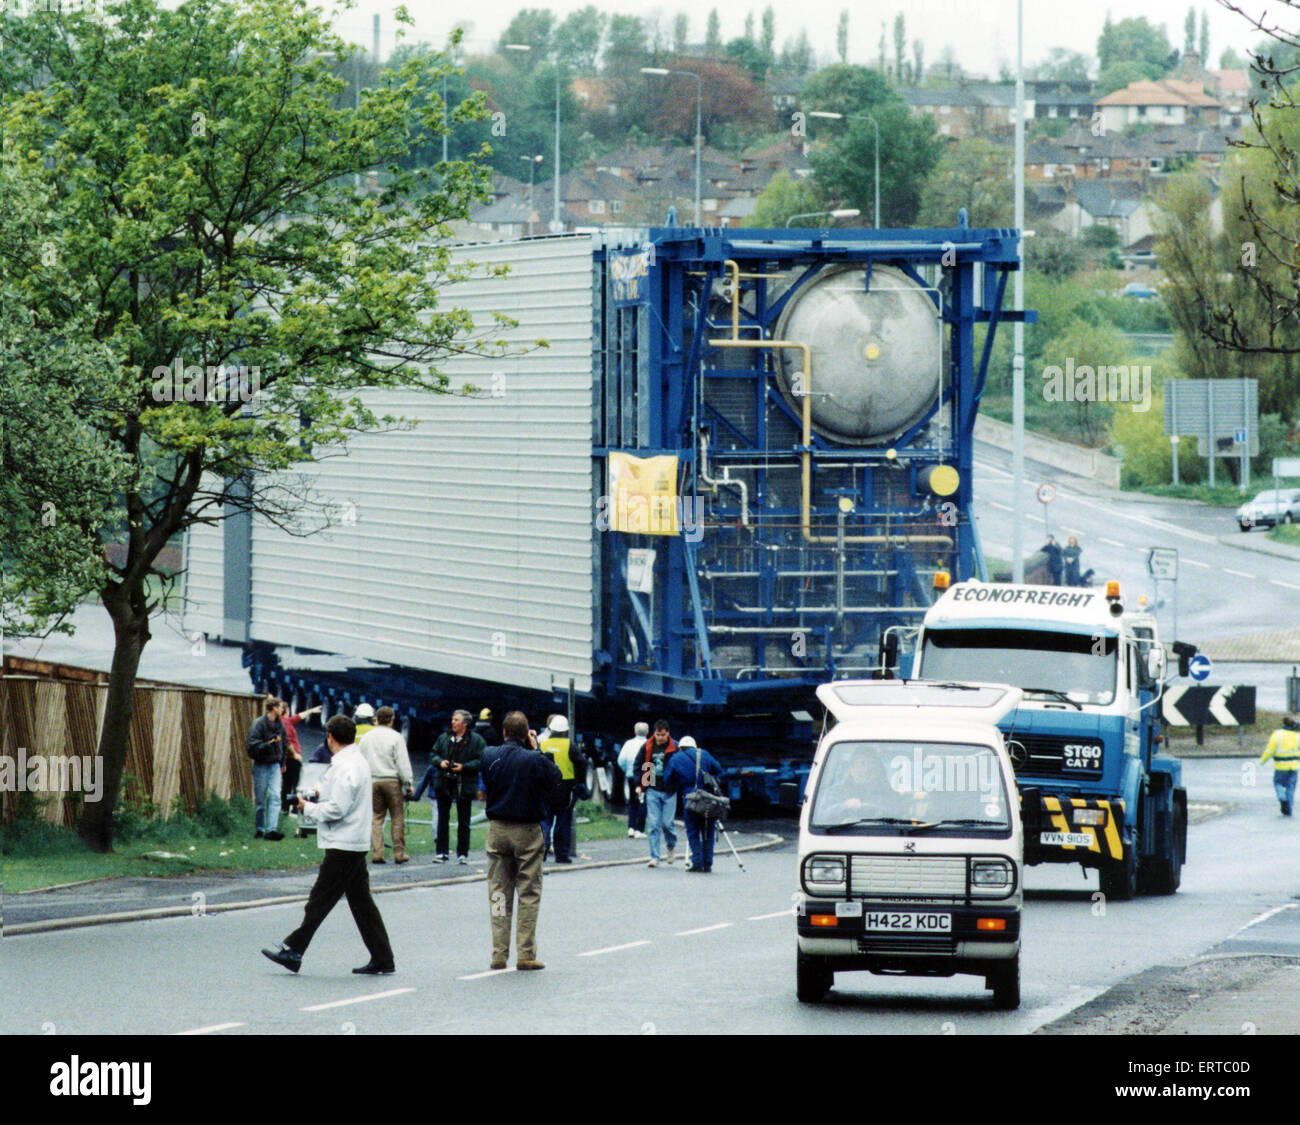 Abnormal load being transported from Redpath Engineering Services Ltd, Portrack, to ICI's Quorn plant at Billingham. The 240 foot long load turns off the A19 to go up Billingham Bank, 2nd May 1993. Stock Photo